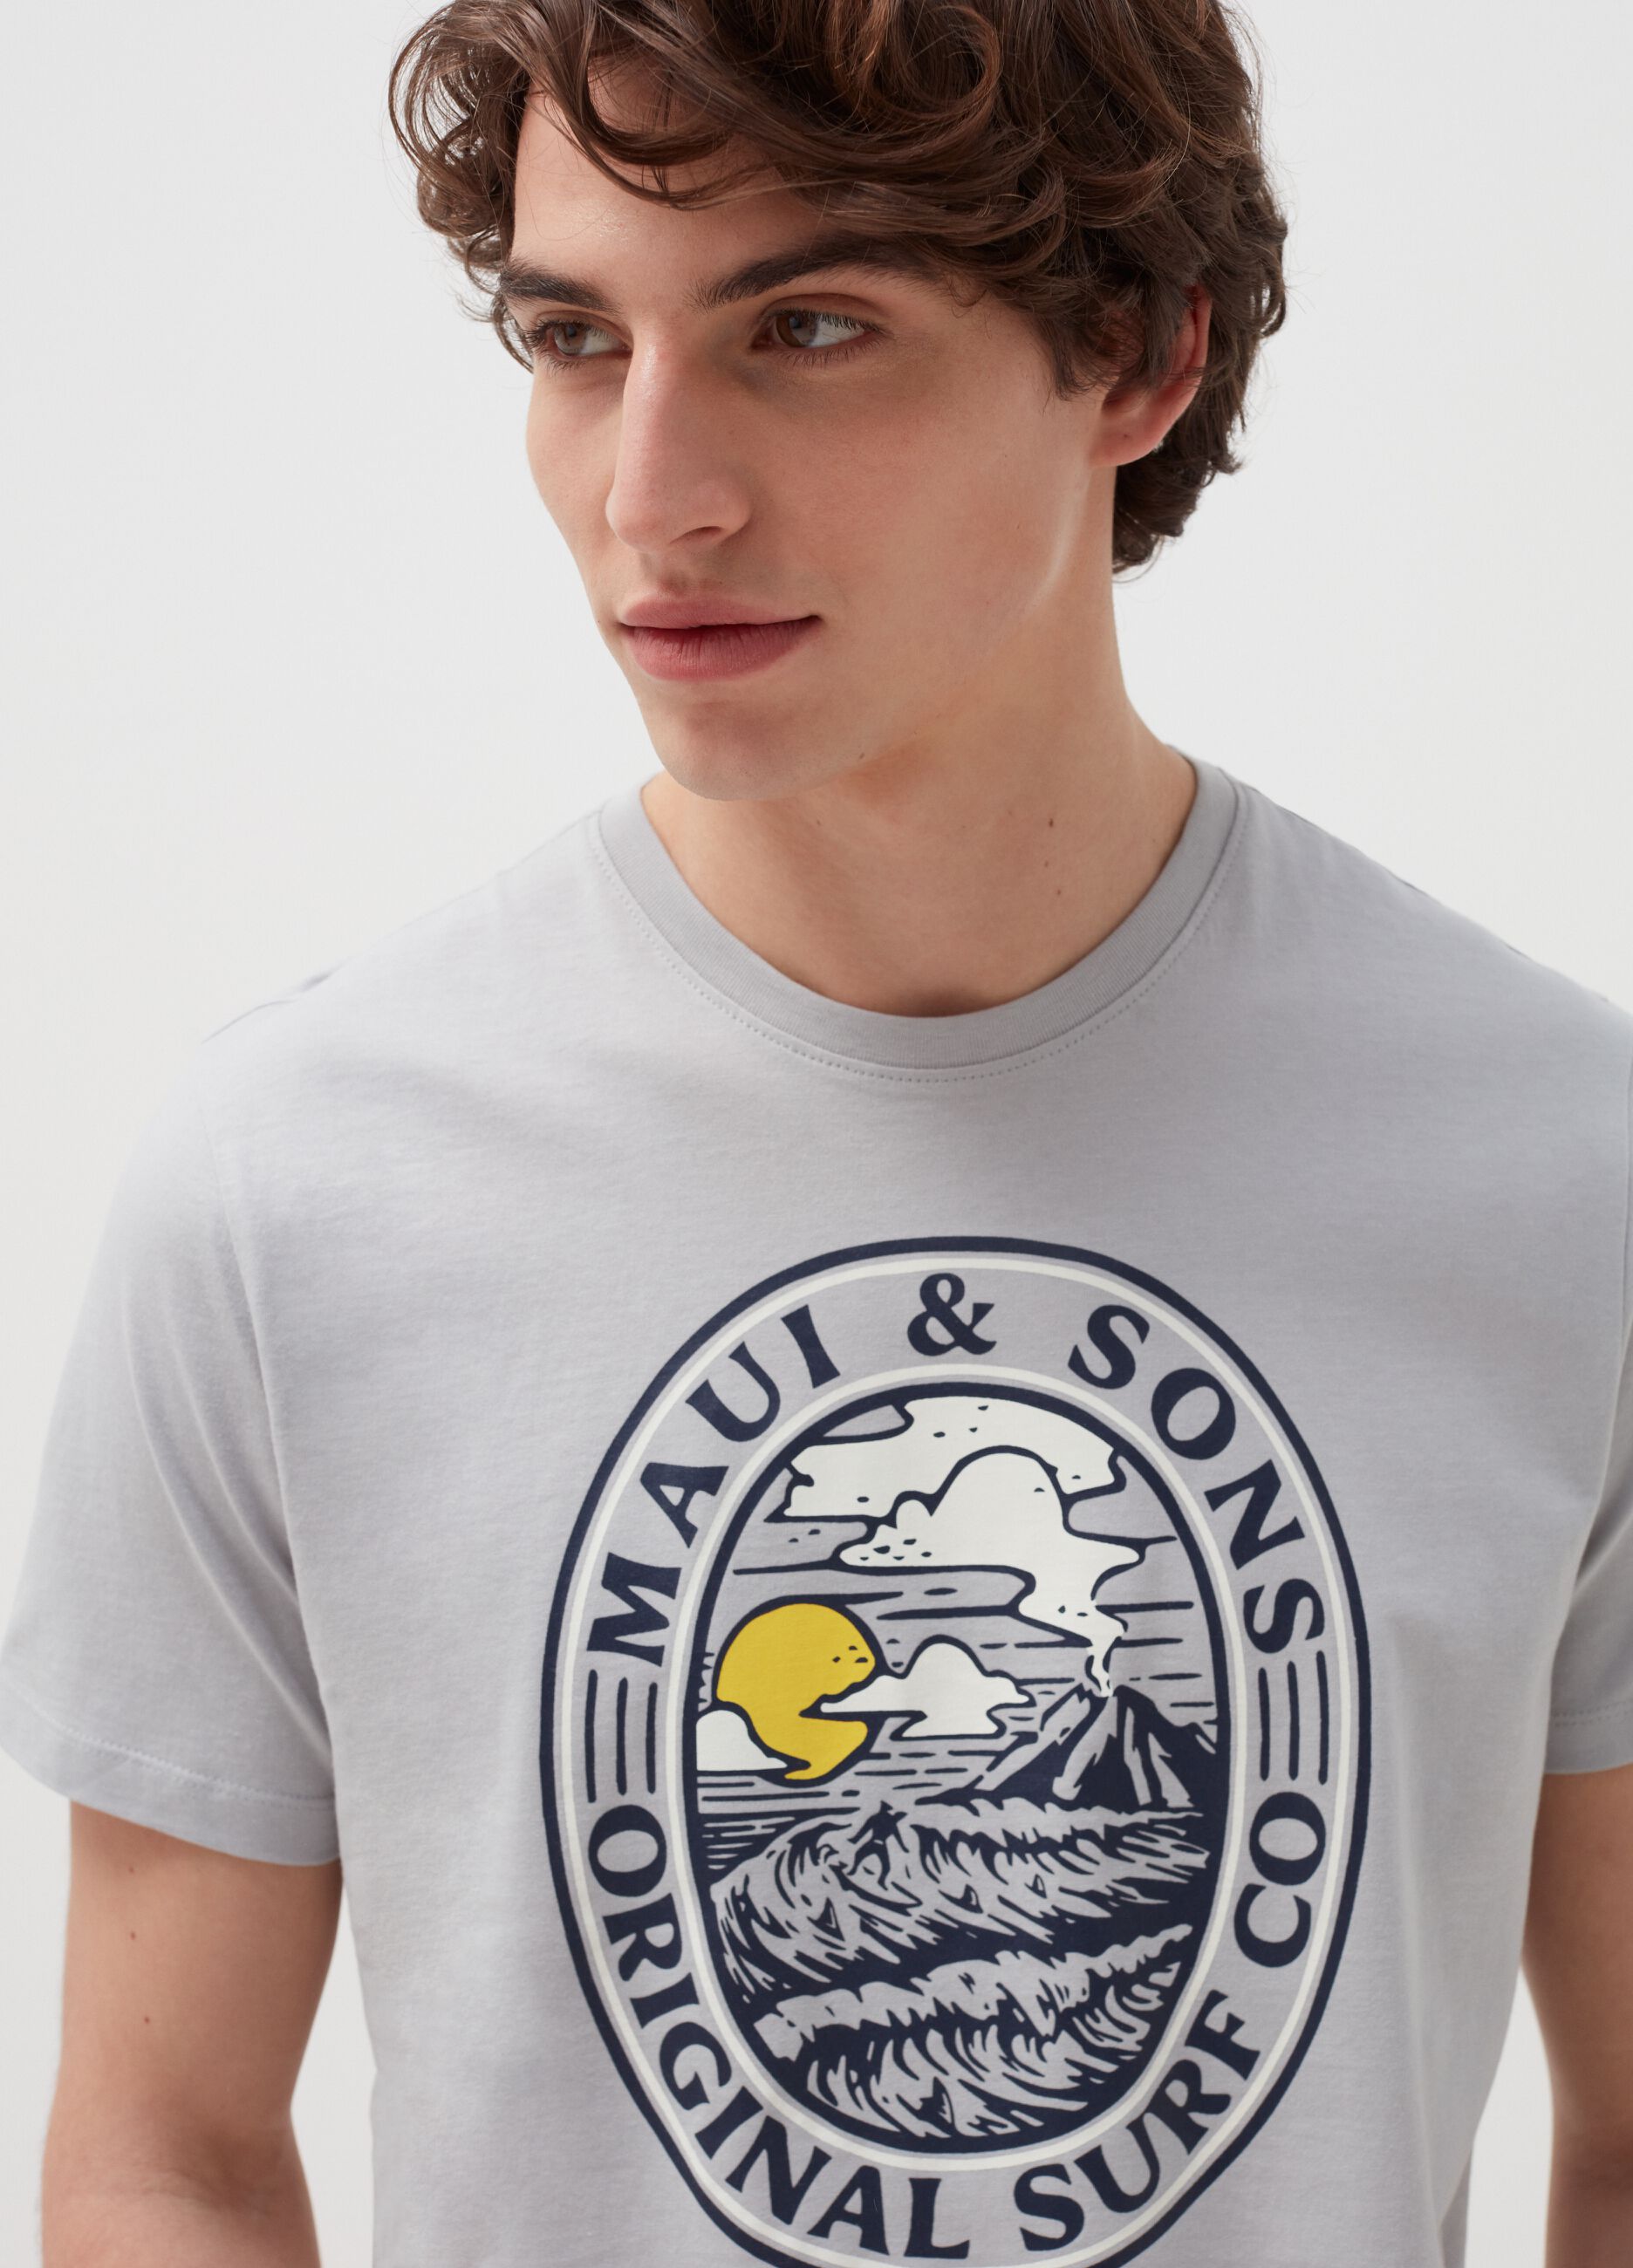 Cotton T-shirt with Maui and Sons surf print